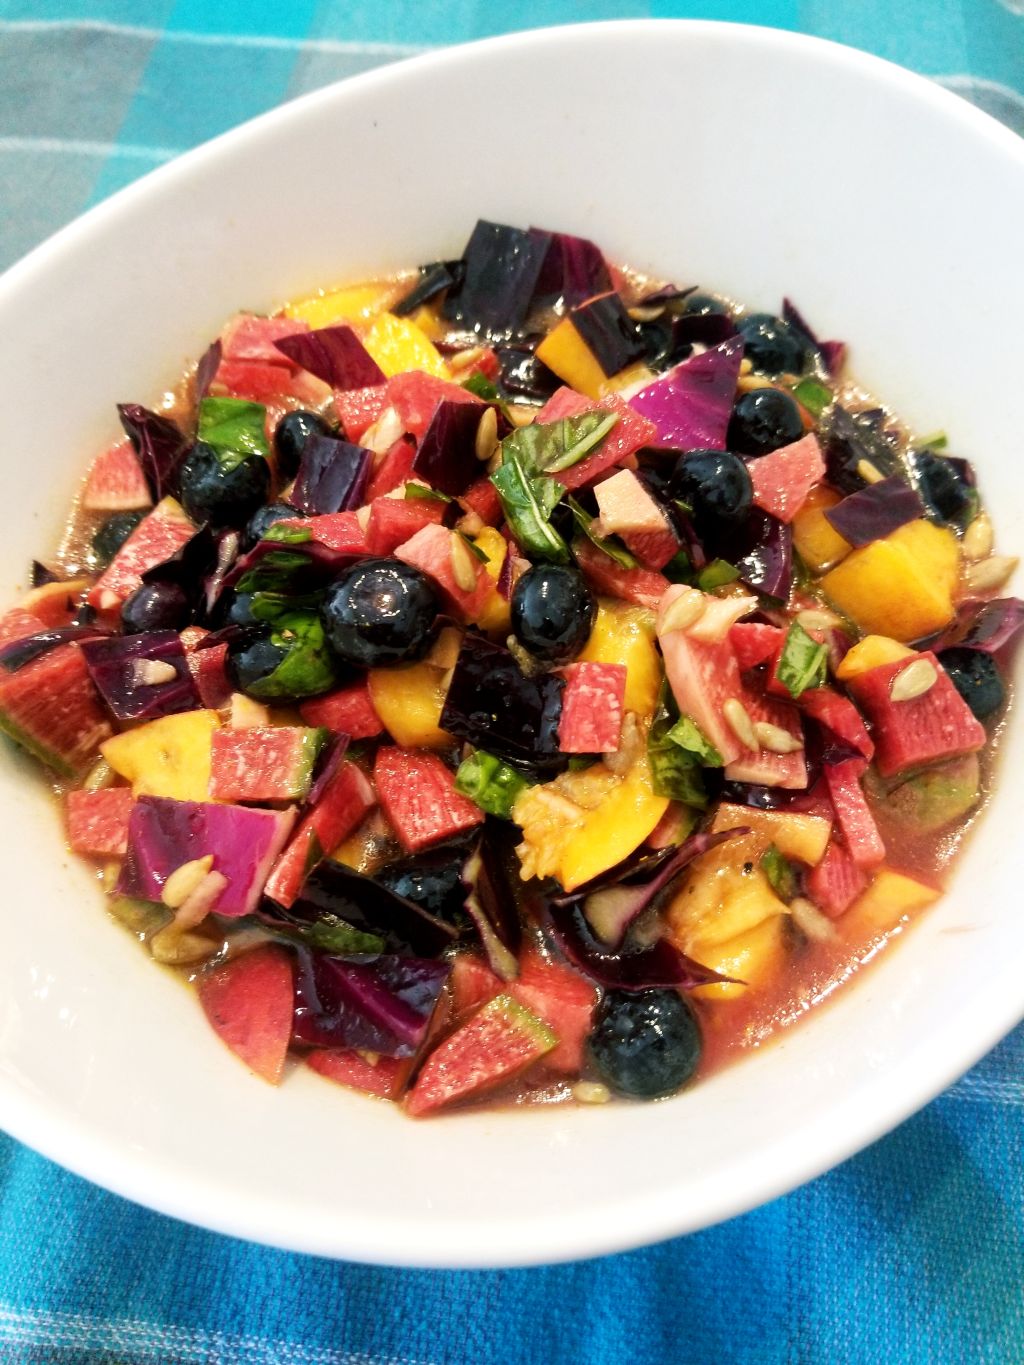 Watermelon Radish Salad with Peach and Blueberry The Salad Shooter